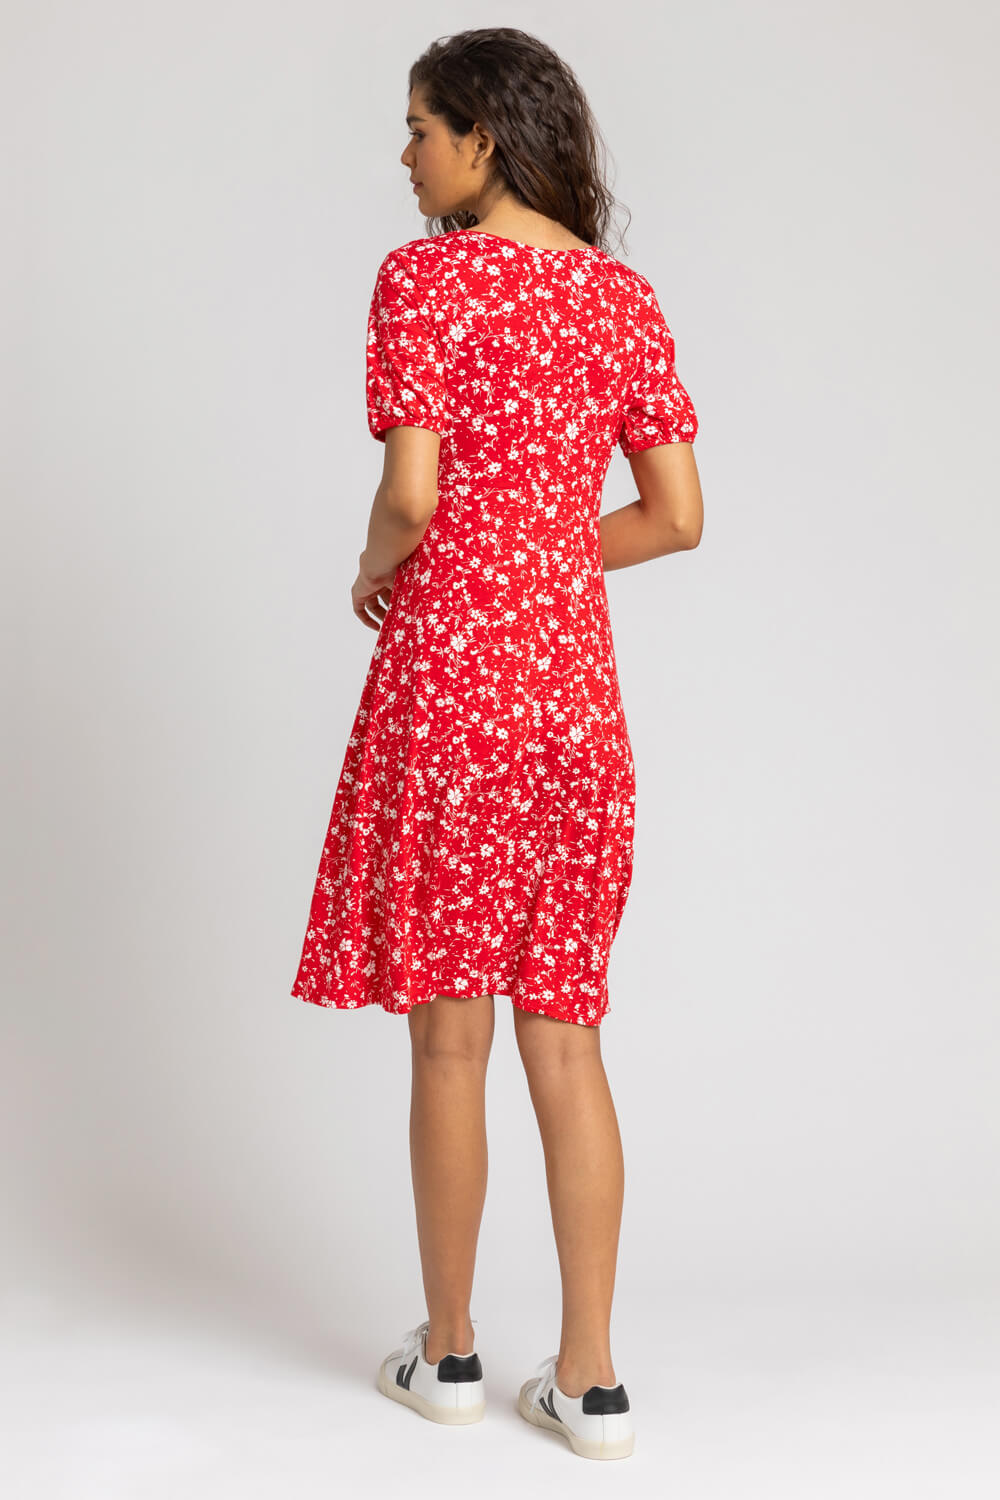 Red Stretch Floral Print Fit & Flare Dress, Image 2 of 5